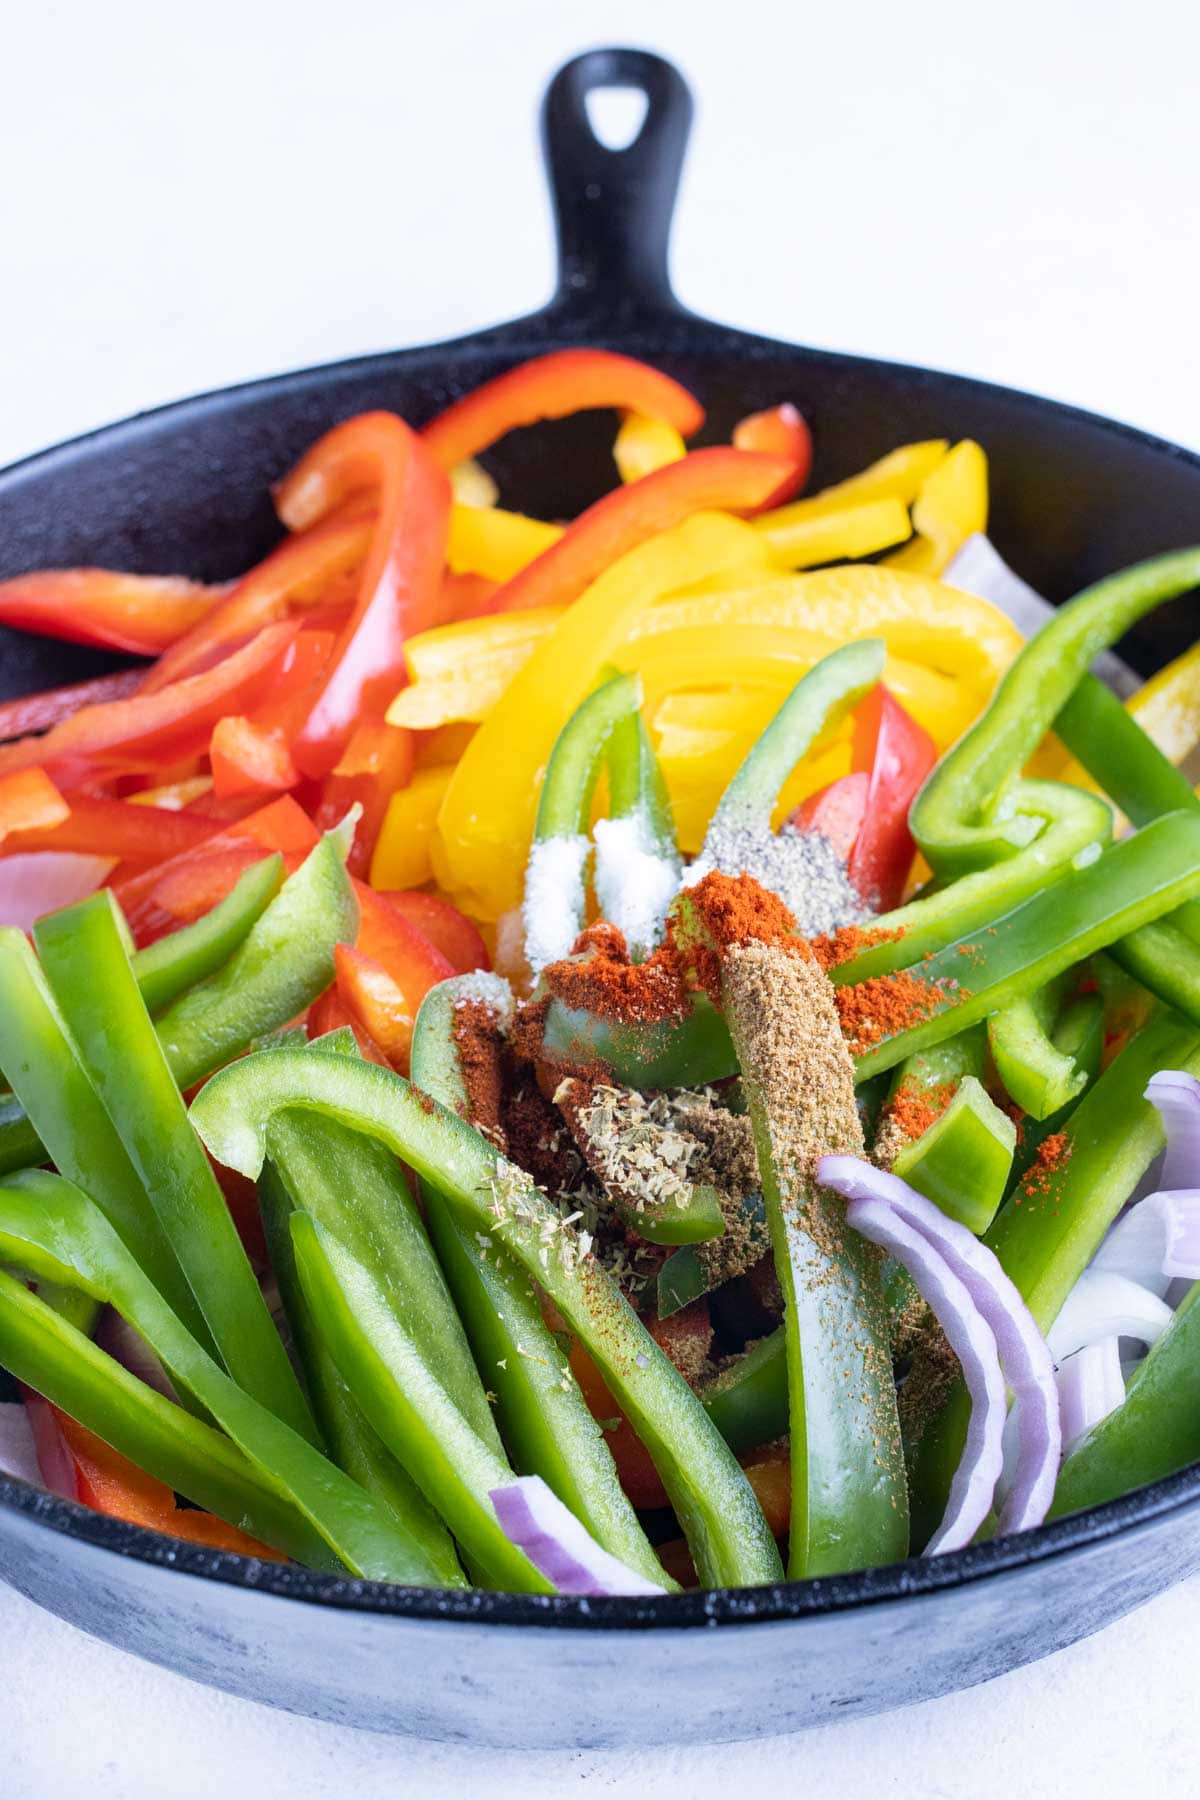 All of the vegetables are put into the cast-iron skillet.